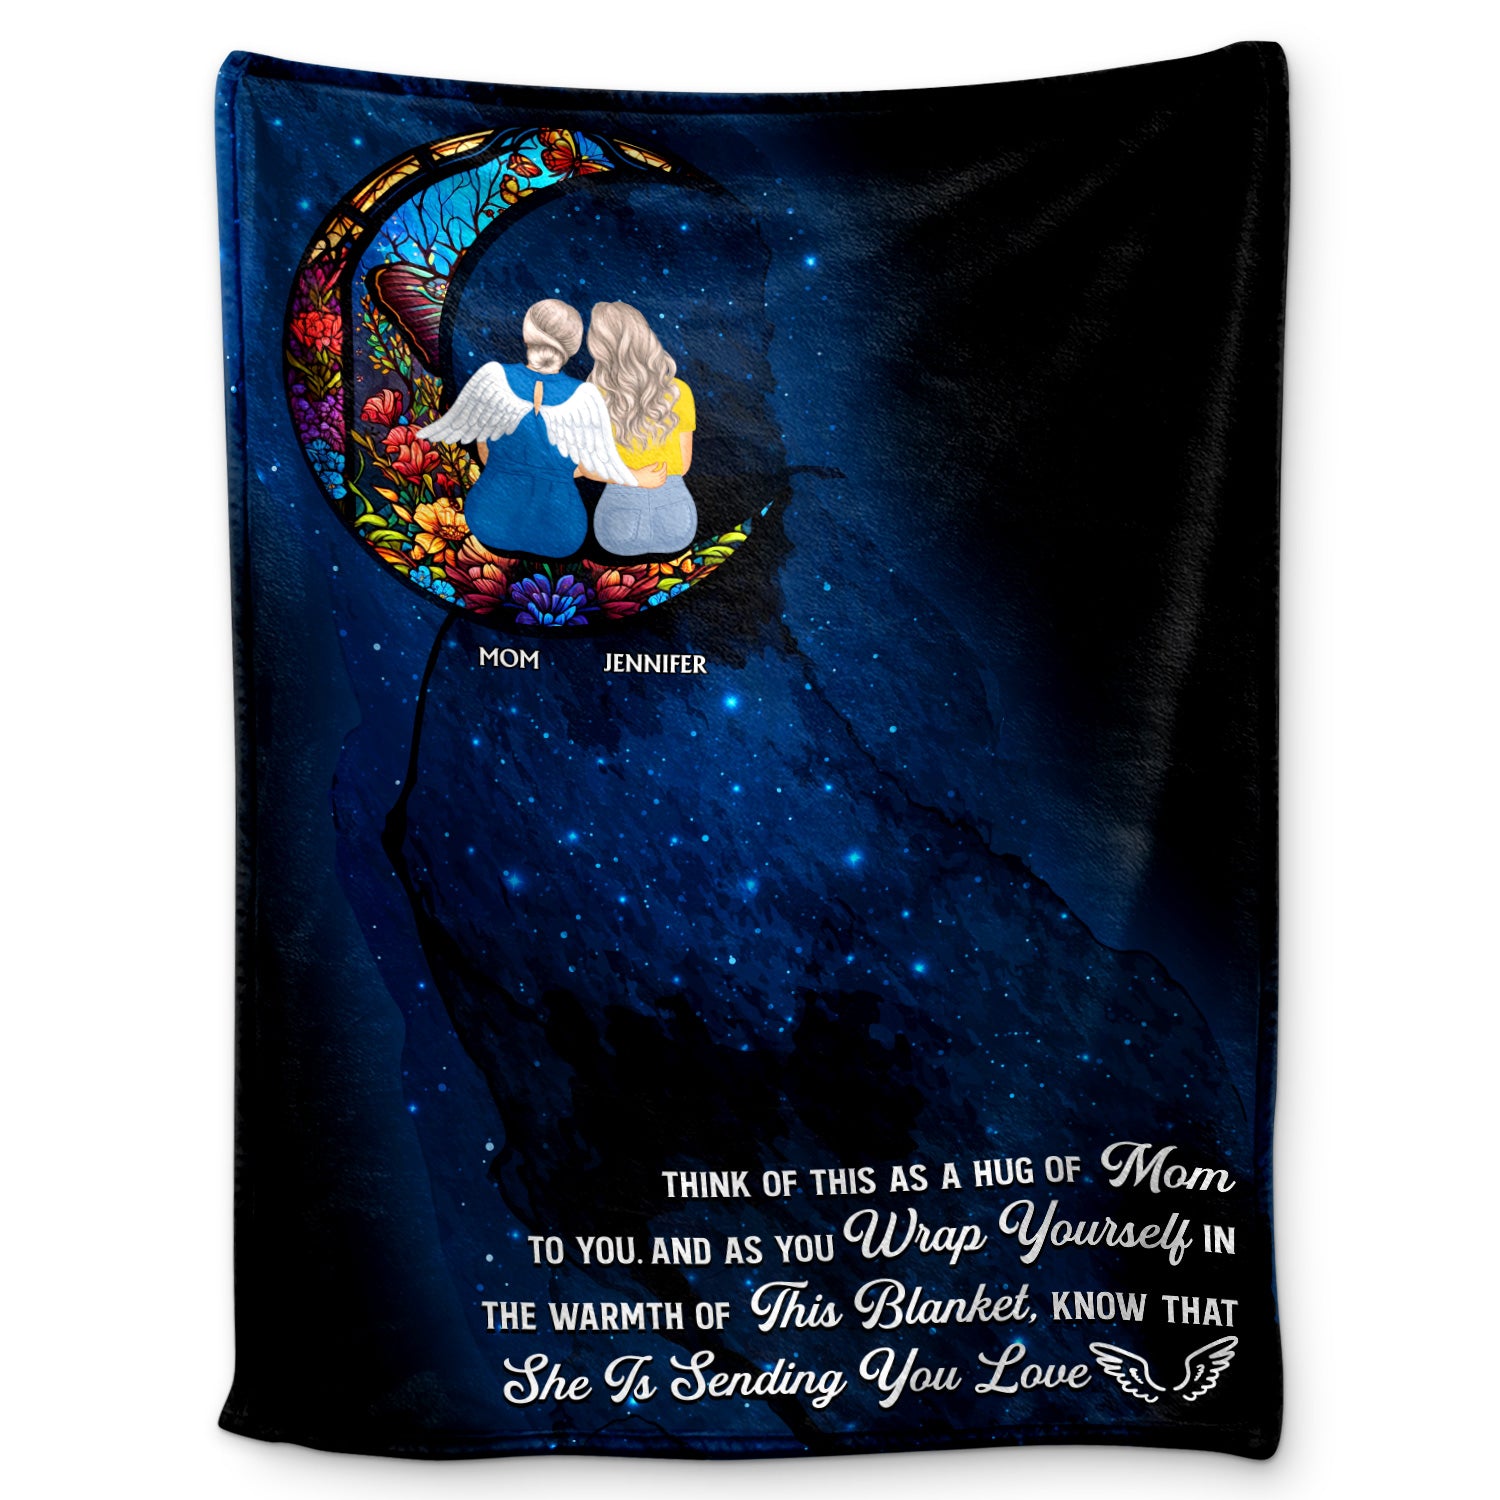 A Hug Of Mom - Memorial Gift For Daughter - Personalized Fleece Blanket